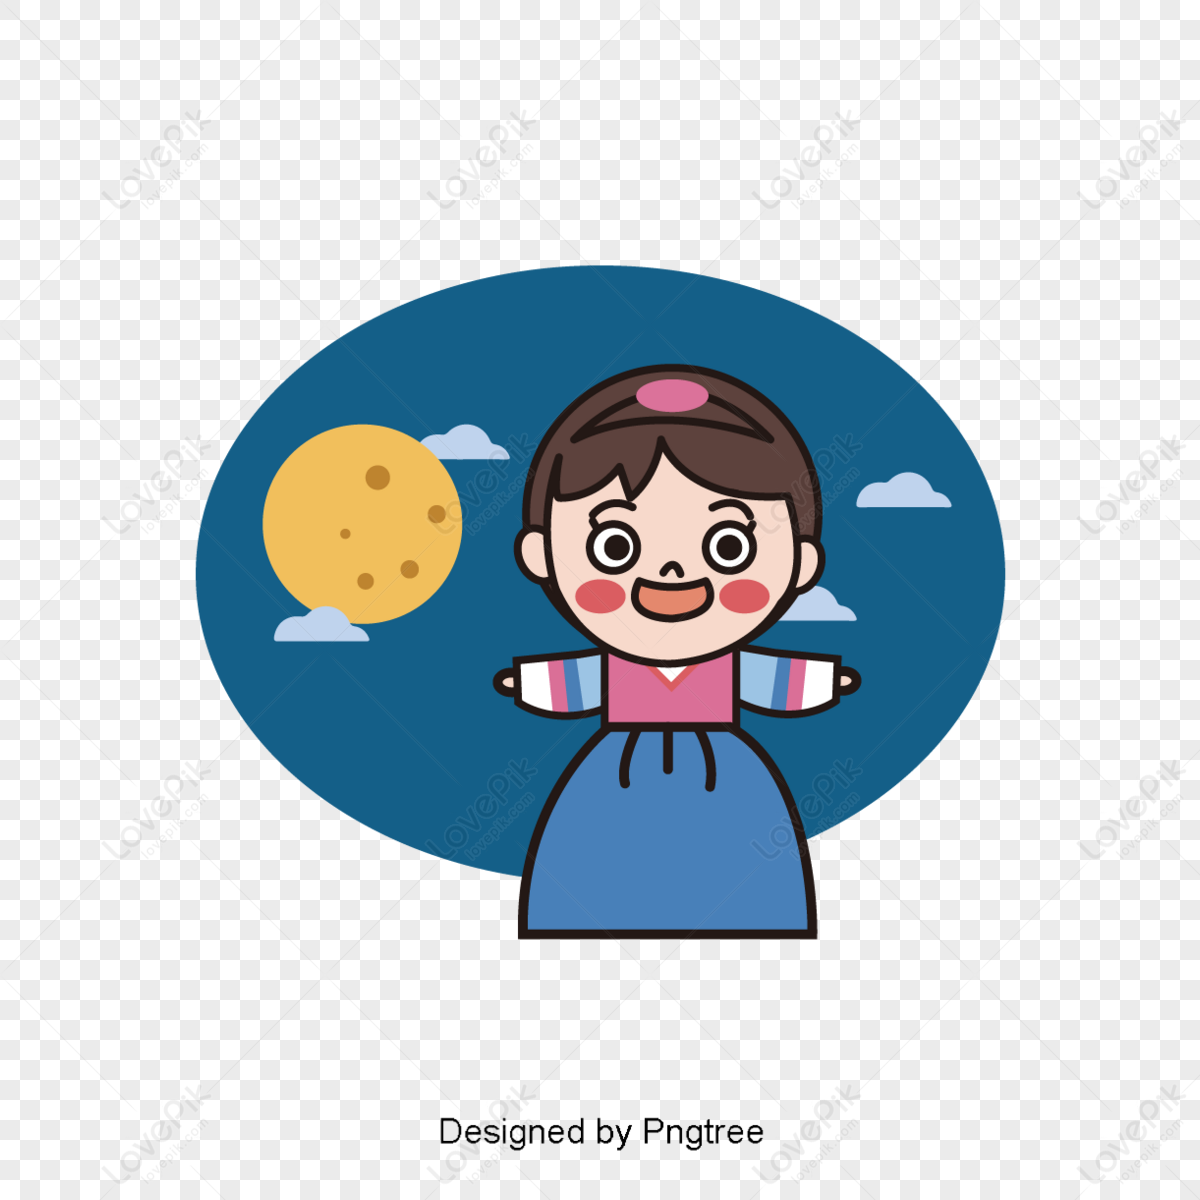 south korea vector character illustration,wall,illustrated people,cartoon characters png transparent image